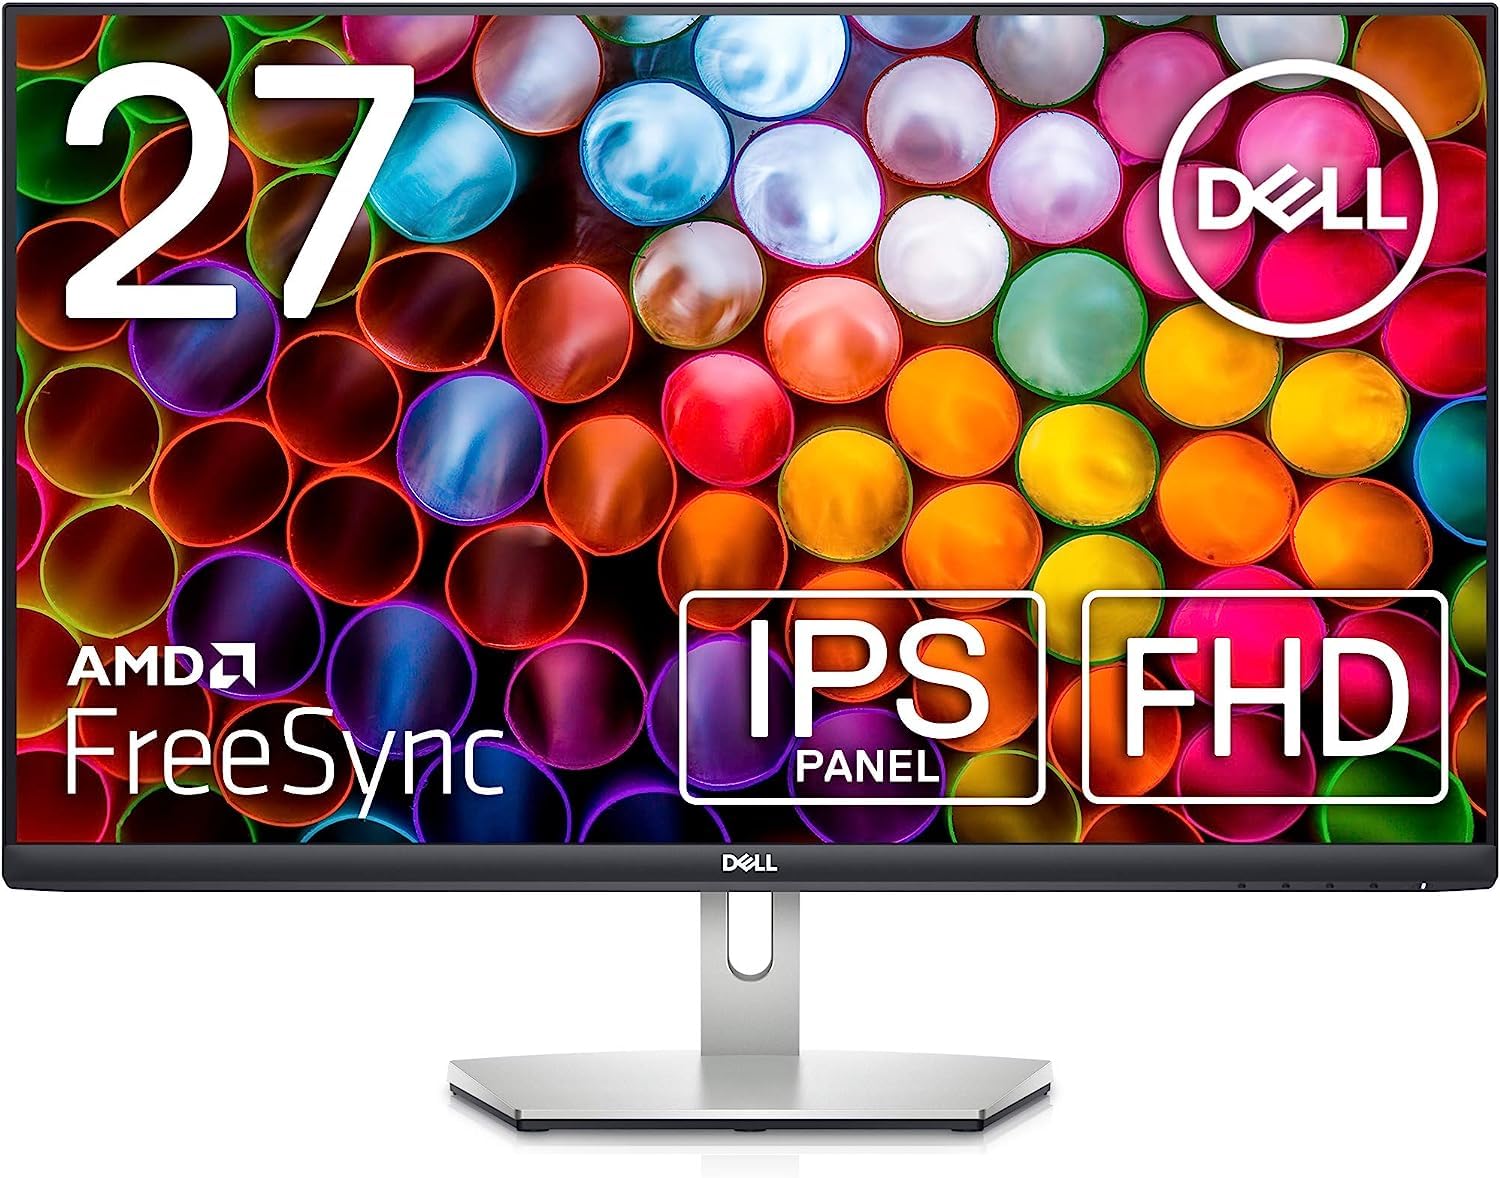 Mua Dell S2721H 27-inch Full HD 1920 x 1080p, 75Hz IPS LED LCD Thin Bezel  Adjustable Gaming Monitor, 4ms Grey-to-Grey Response Time, Built-in Dual  Speakers, HDMI ports, AMD FreeSync, Platinum Silver trên